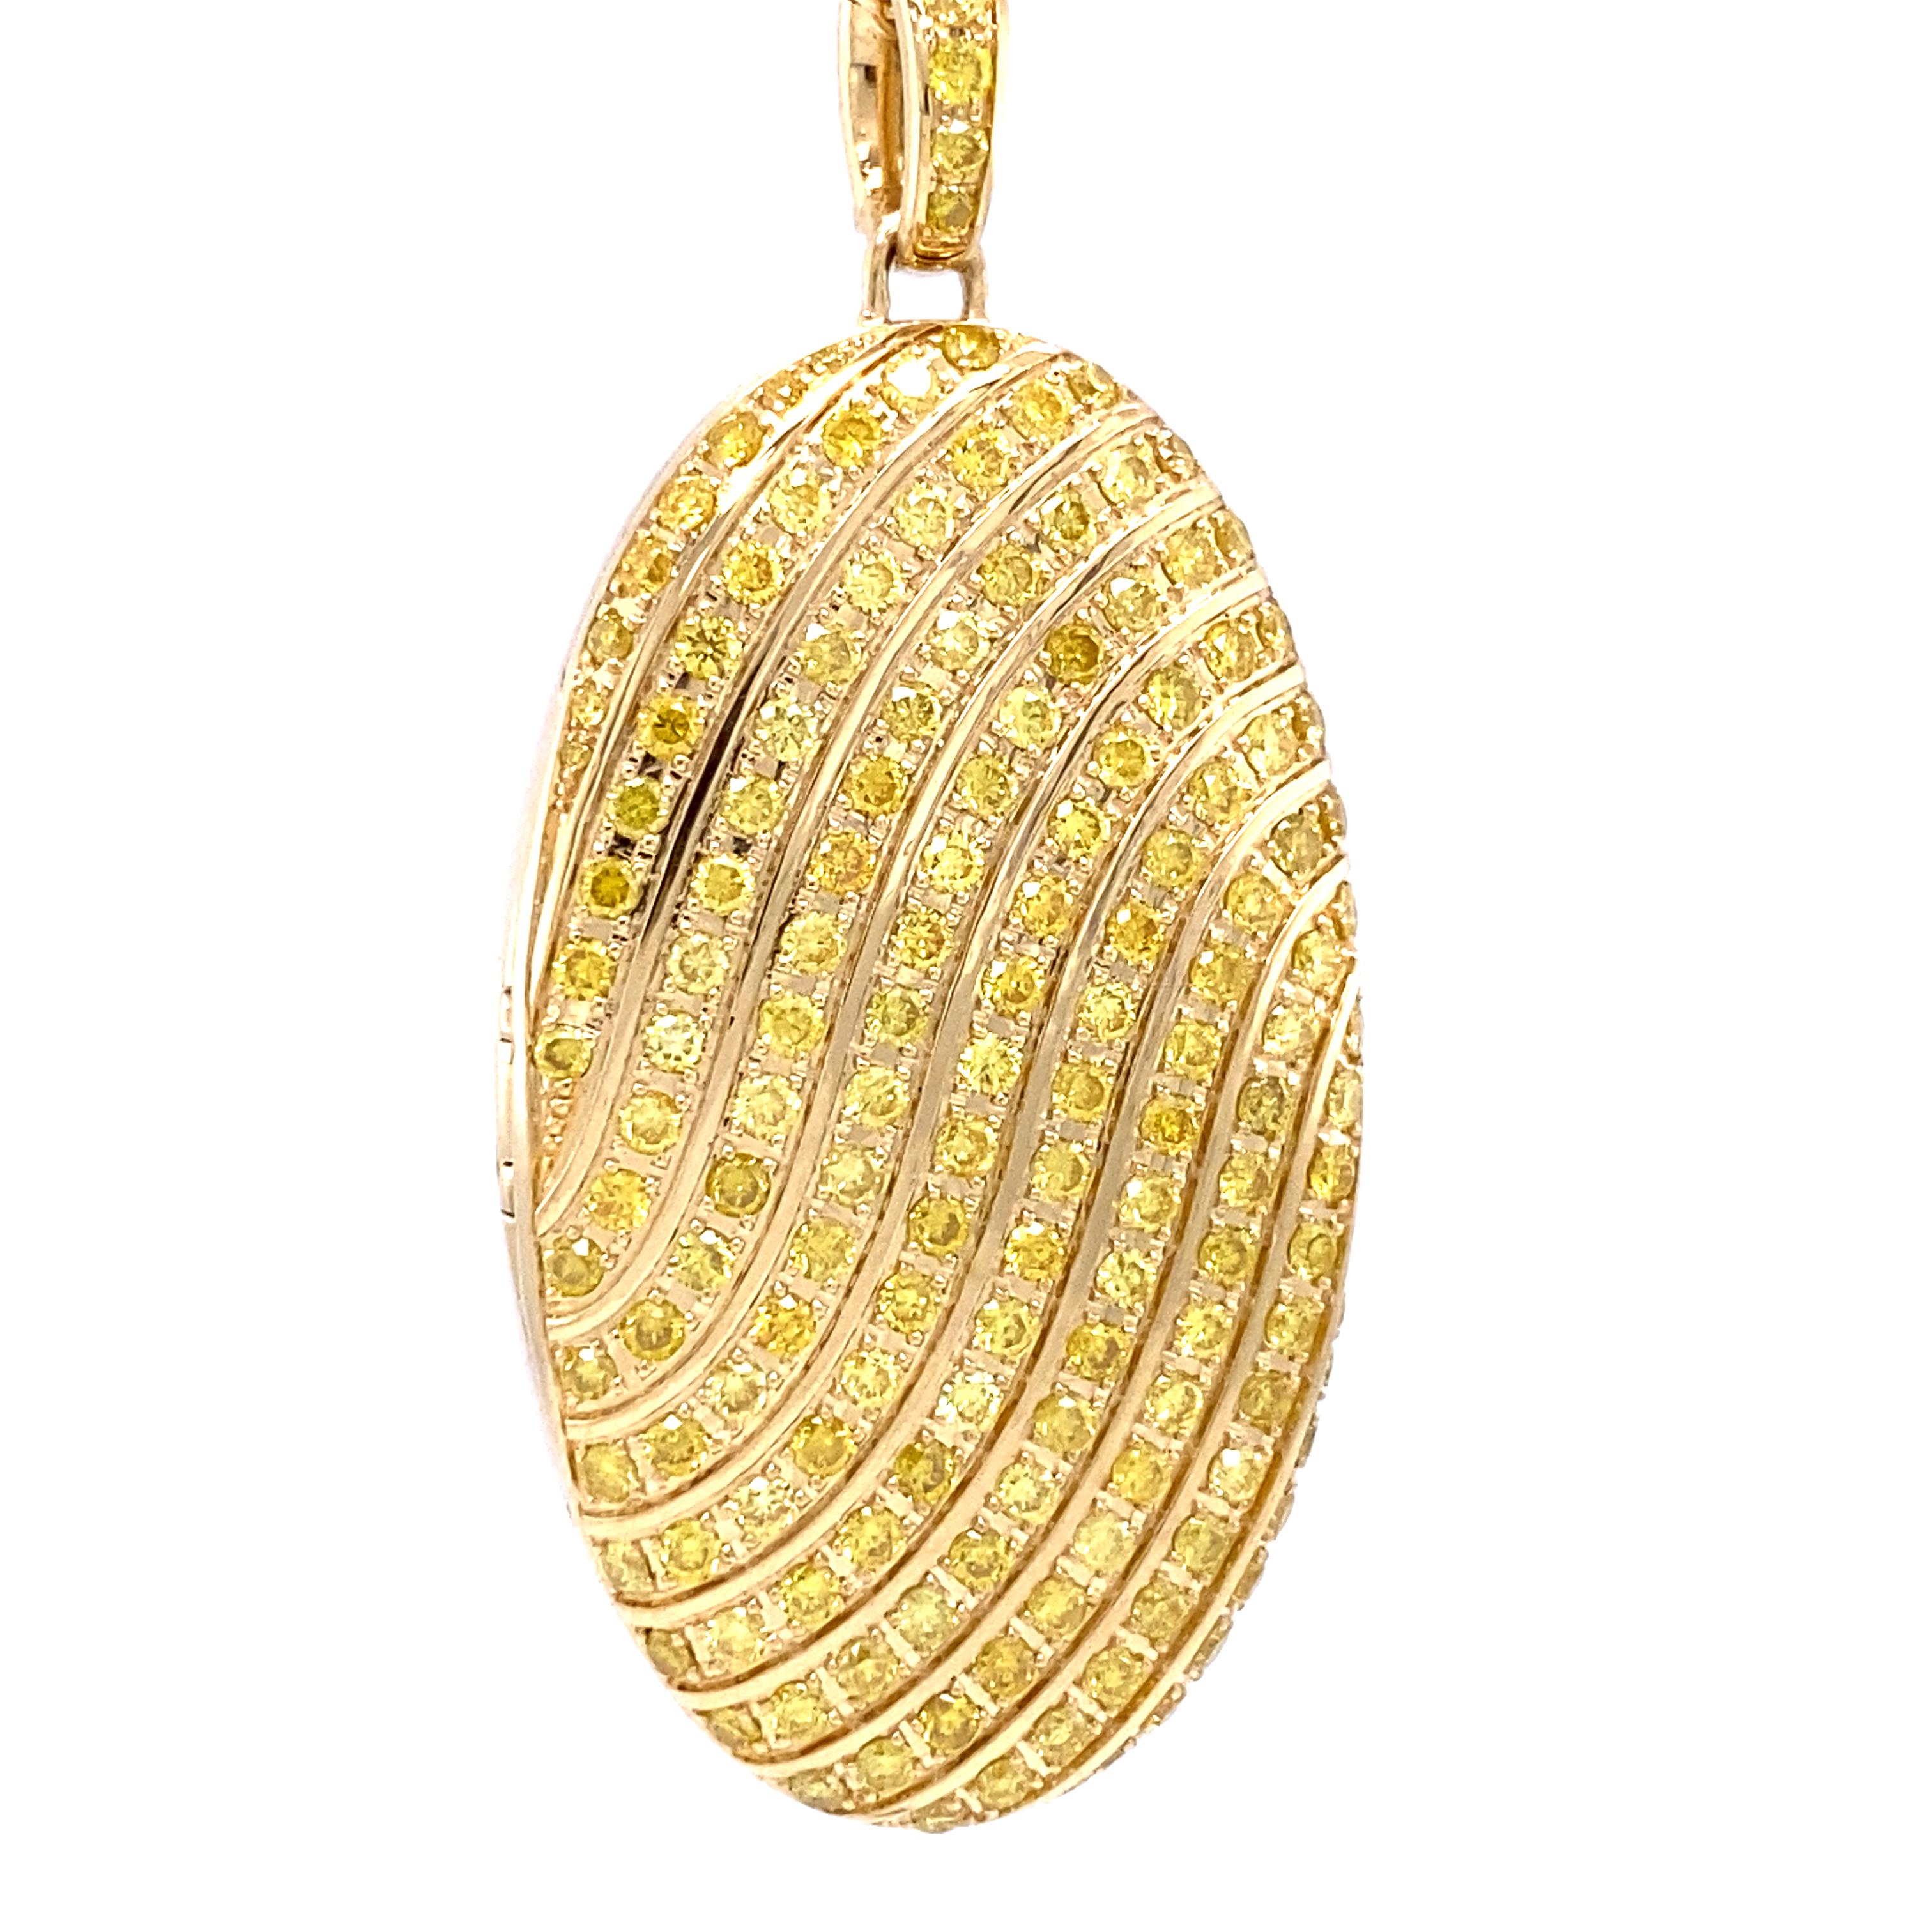 Victor Mayer customizable oval locket pendant 18k yellow gold, Calima Collection, 155 fancy yellow diamonds, total 1.76 ct, G VS measurements app. 34.0 mm x 20.0 mm

About the creator Victor Mayer
Victor Mayer is internationally renowned for elegant